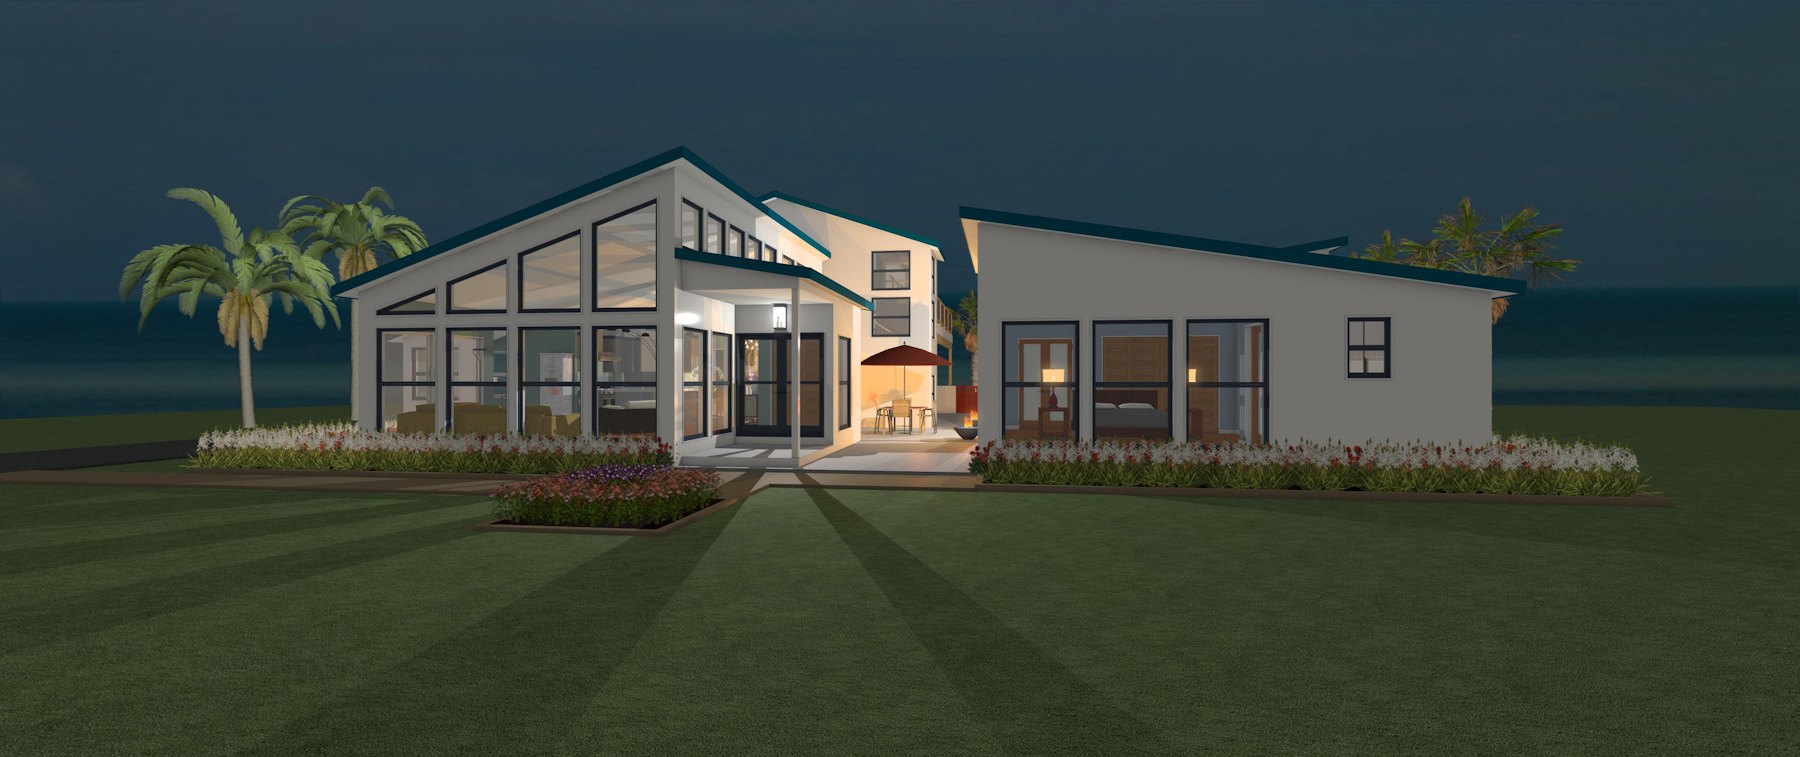 Modern home design with middle breezeway.